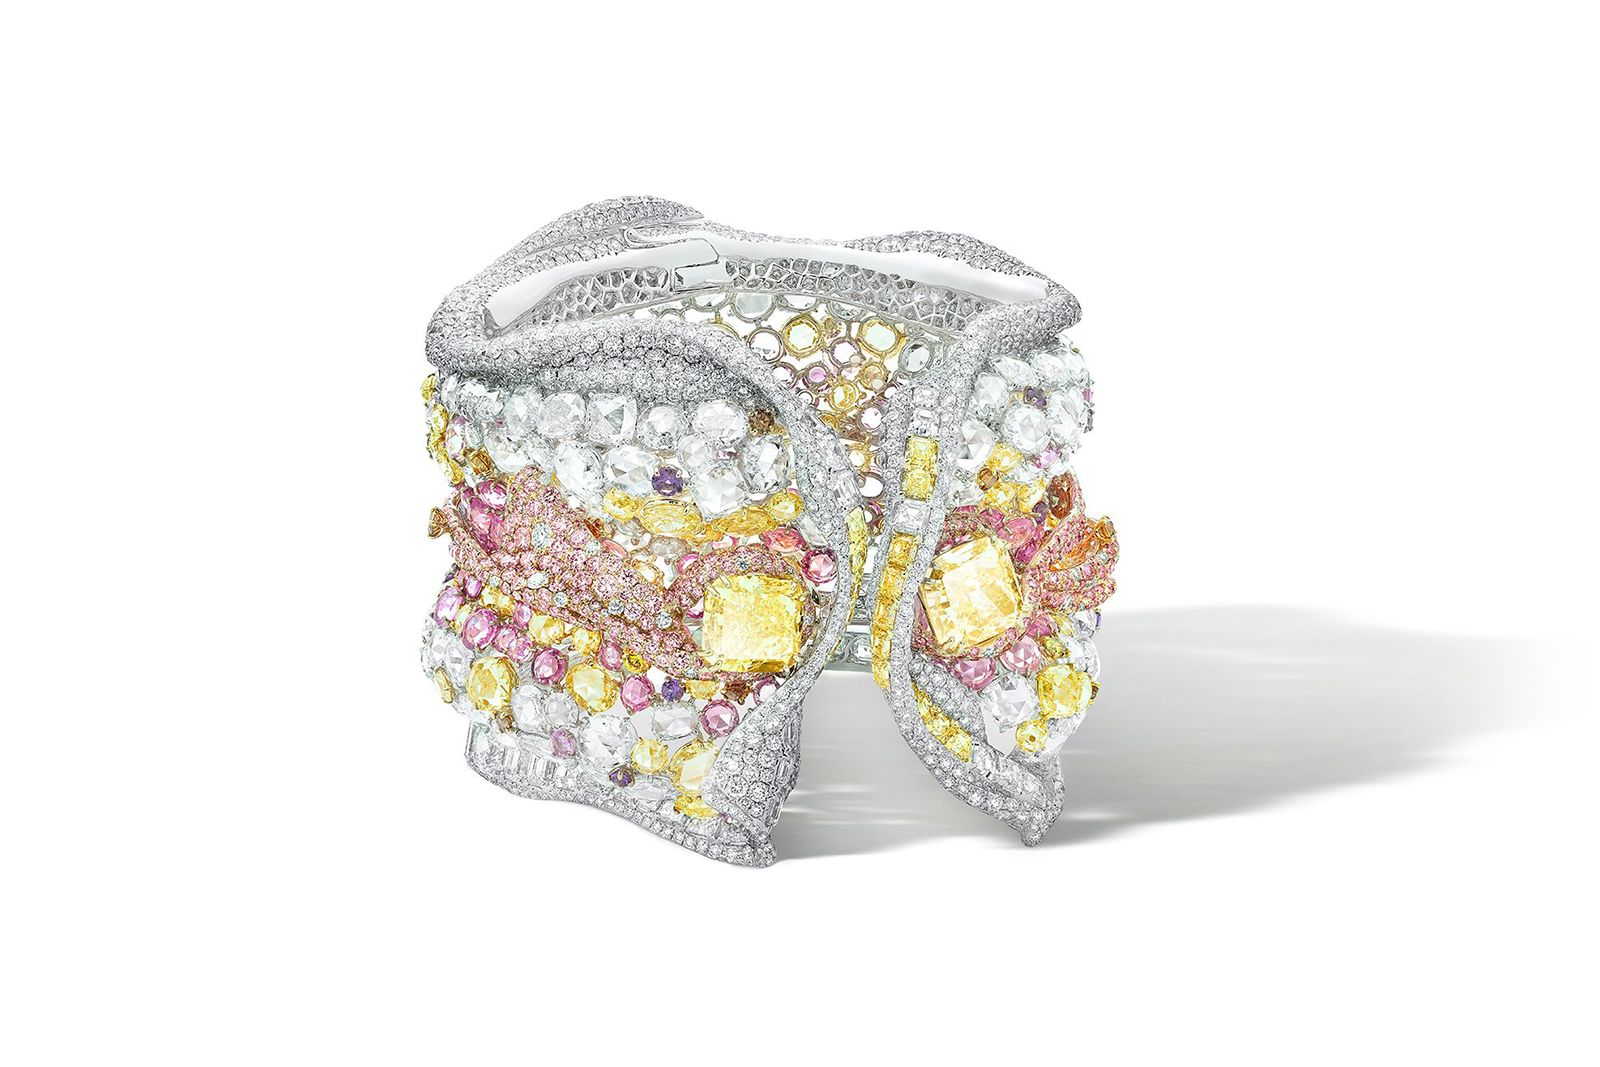 The Best New High Jewelry of 2022 From Chanel, De Beers & More